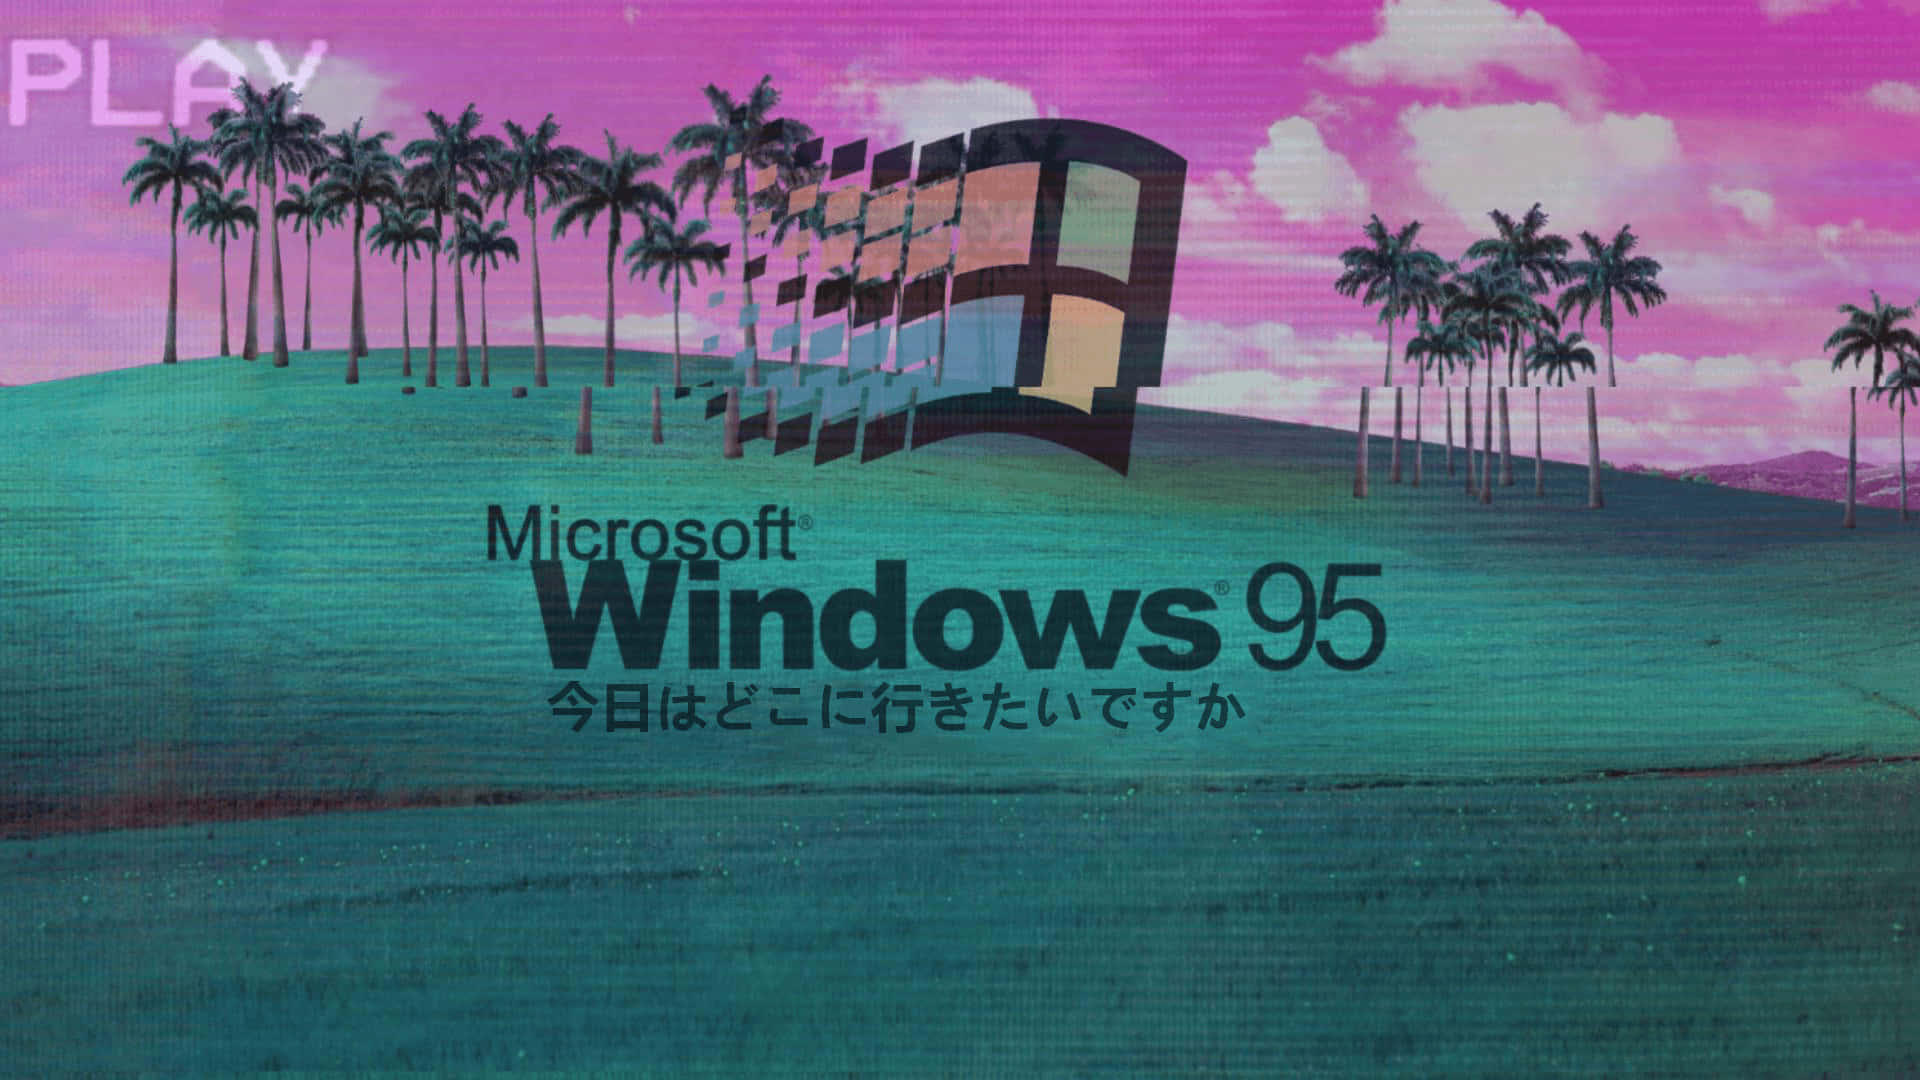 Windows 95 Logo With Palm Trees Wallpaper